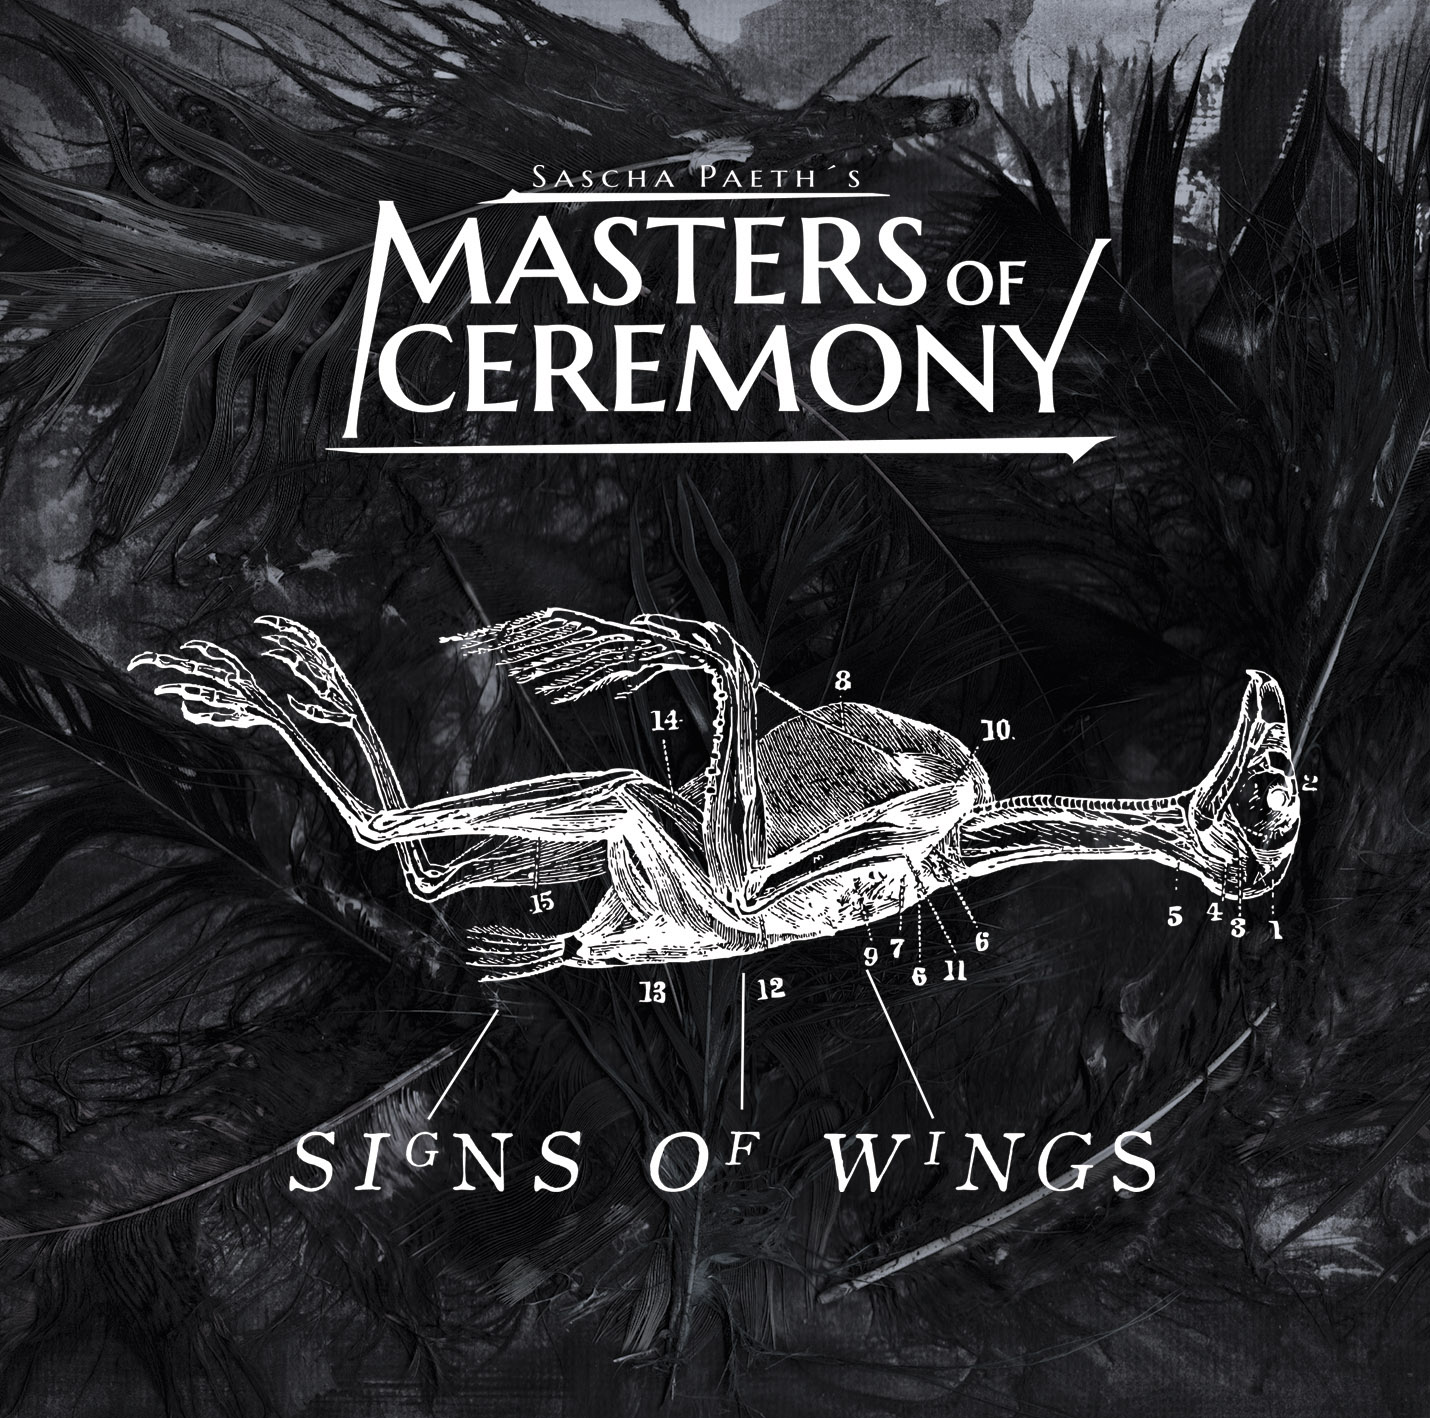 SASCHA PAETH’S MASTERS OF CEREMONY - “Signs of Wings”